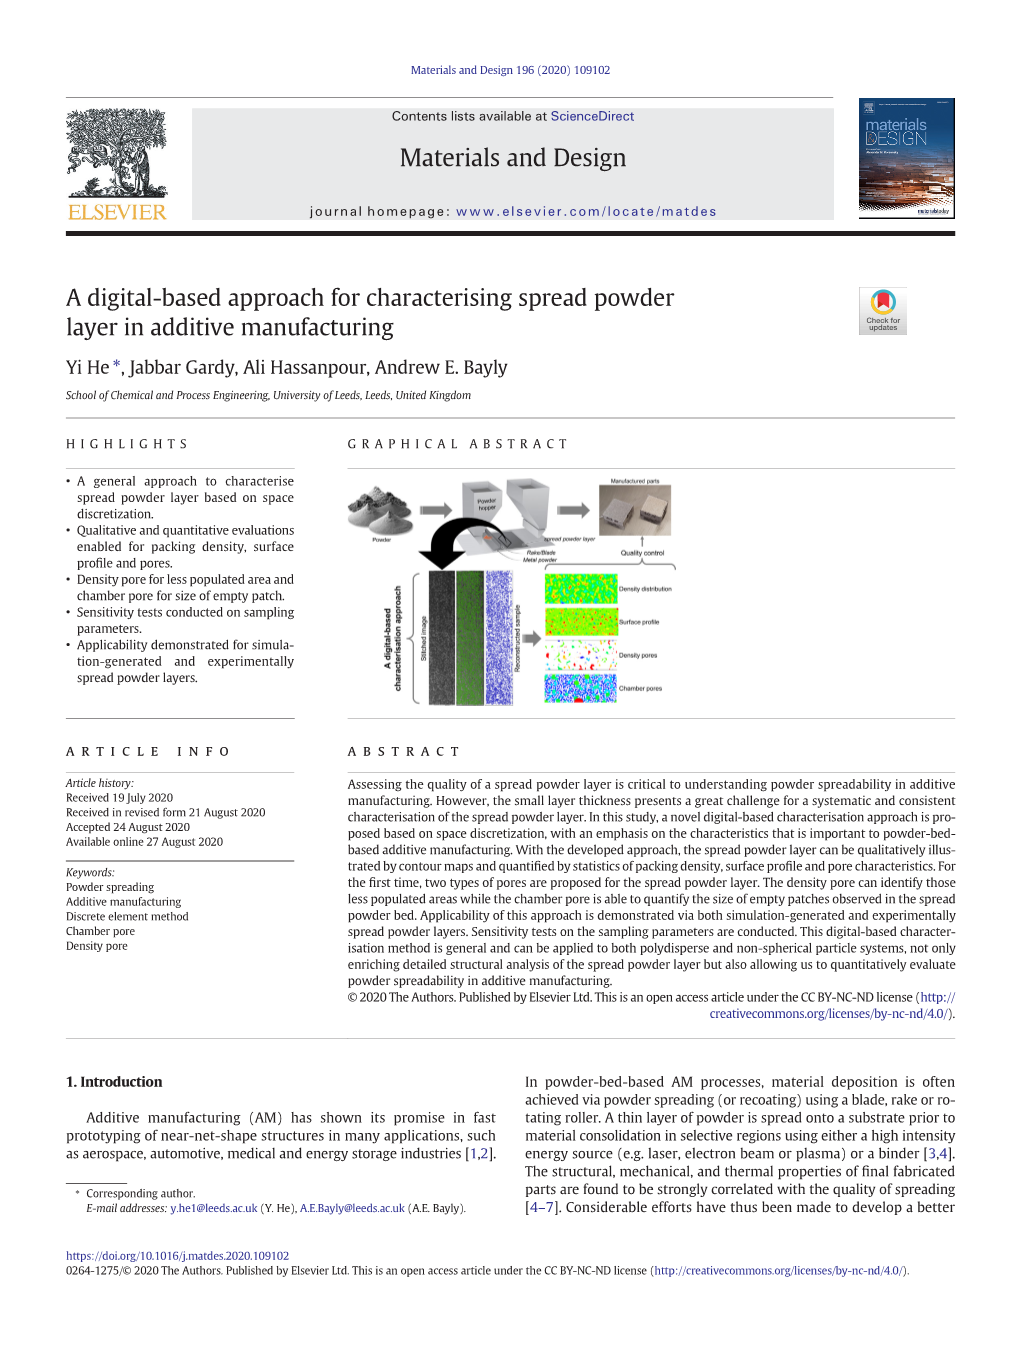 A Digital-Based Approach for Characterising Spread Powder Layer in Additive Manufacturing